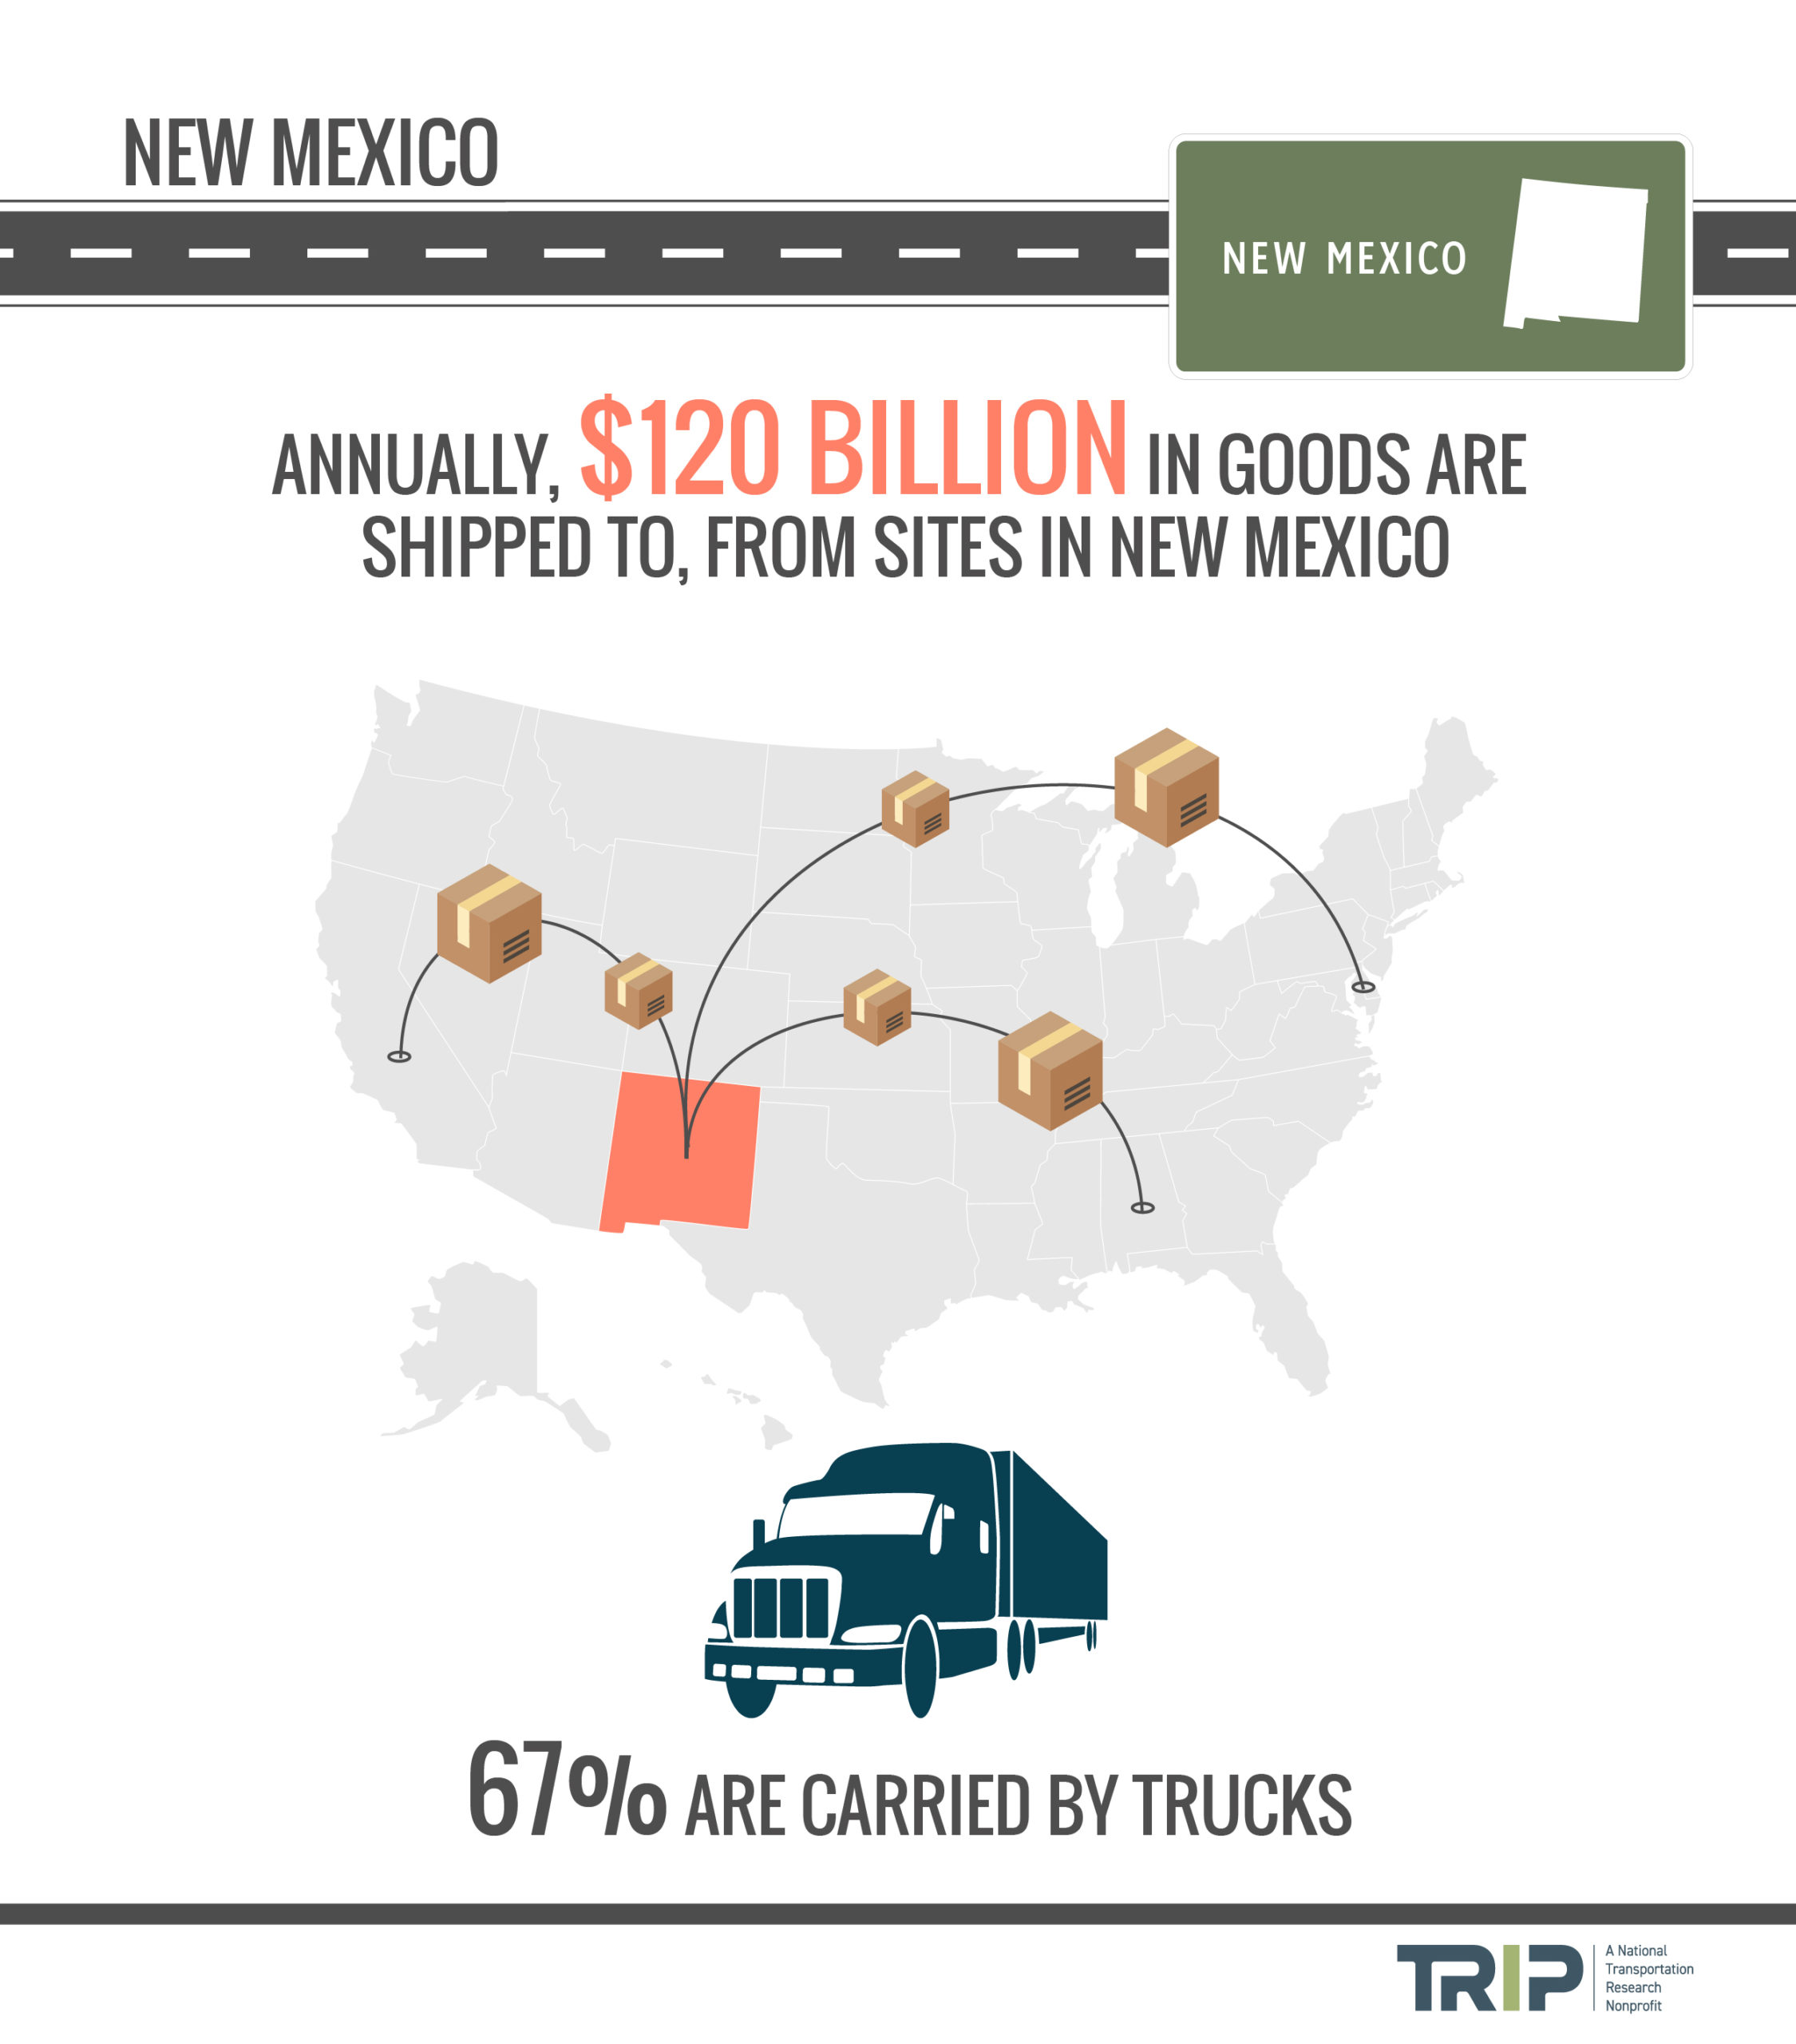 New Mexico Goods Shipped Infographic – January 2022